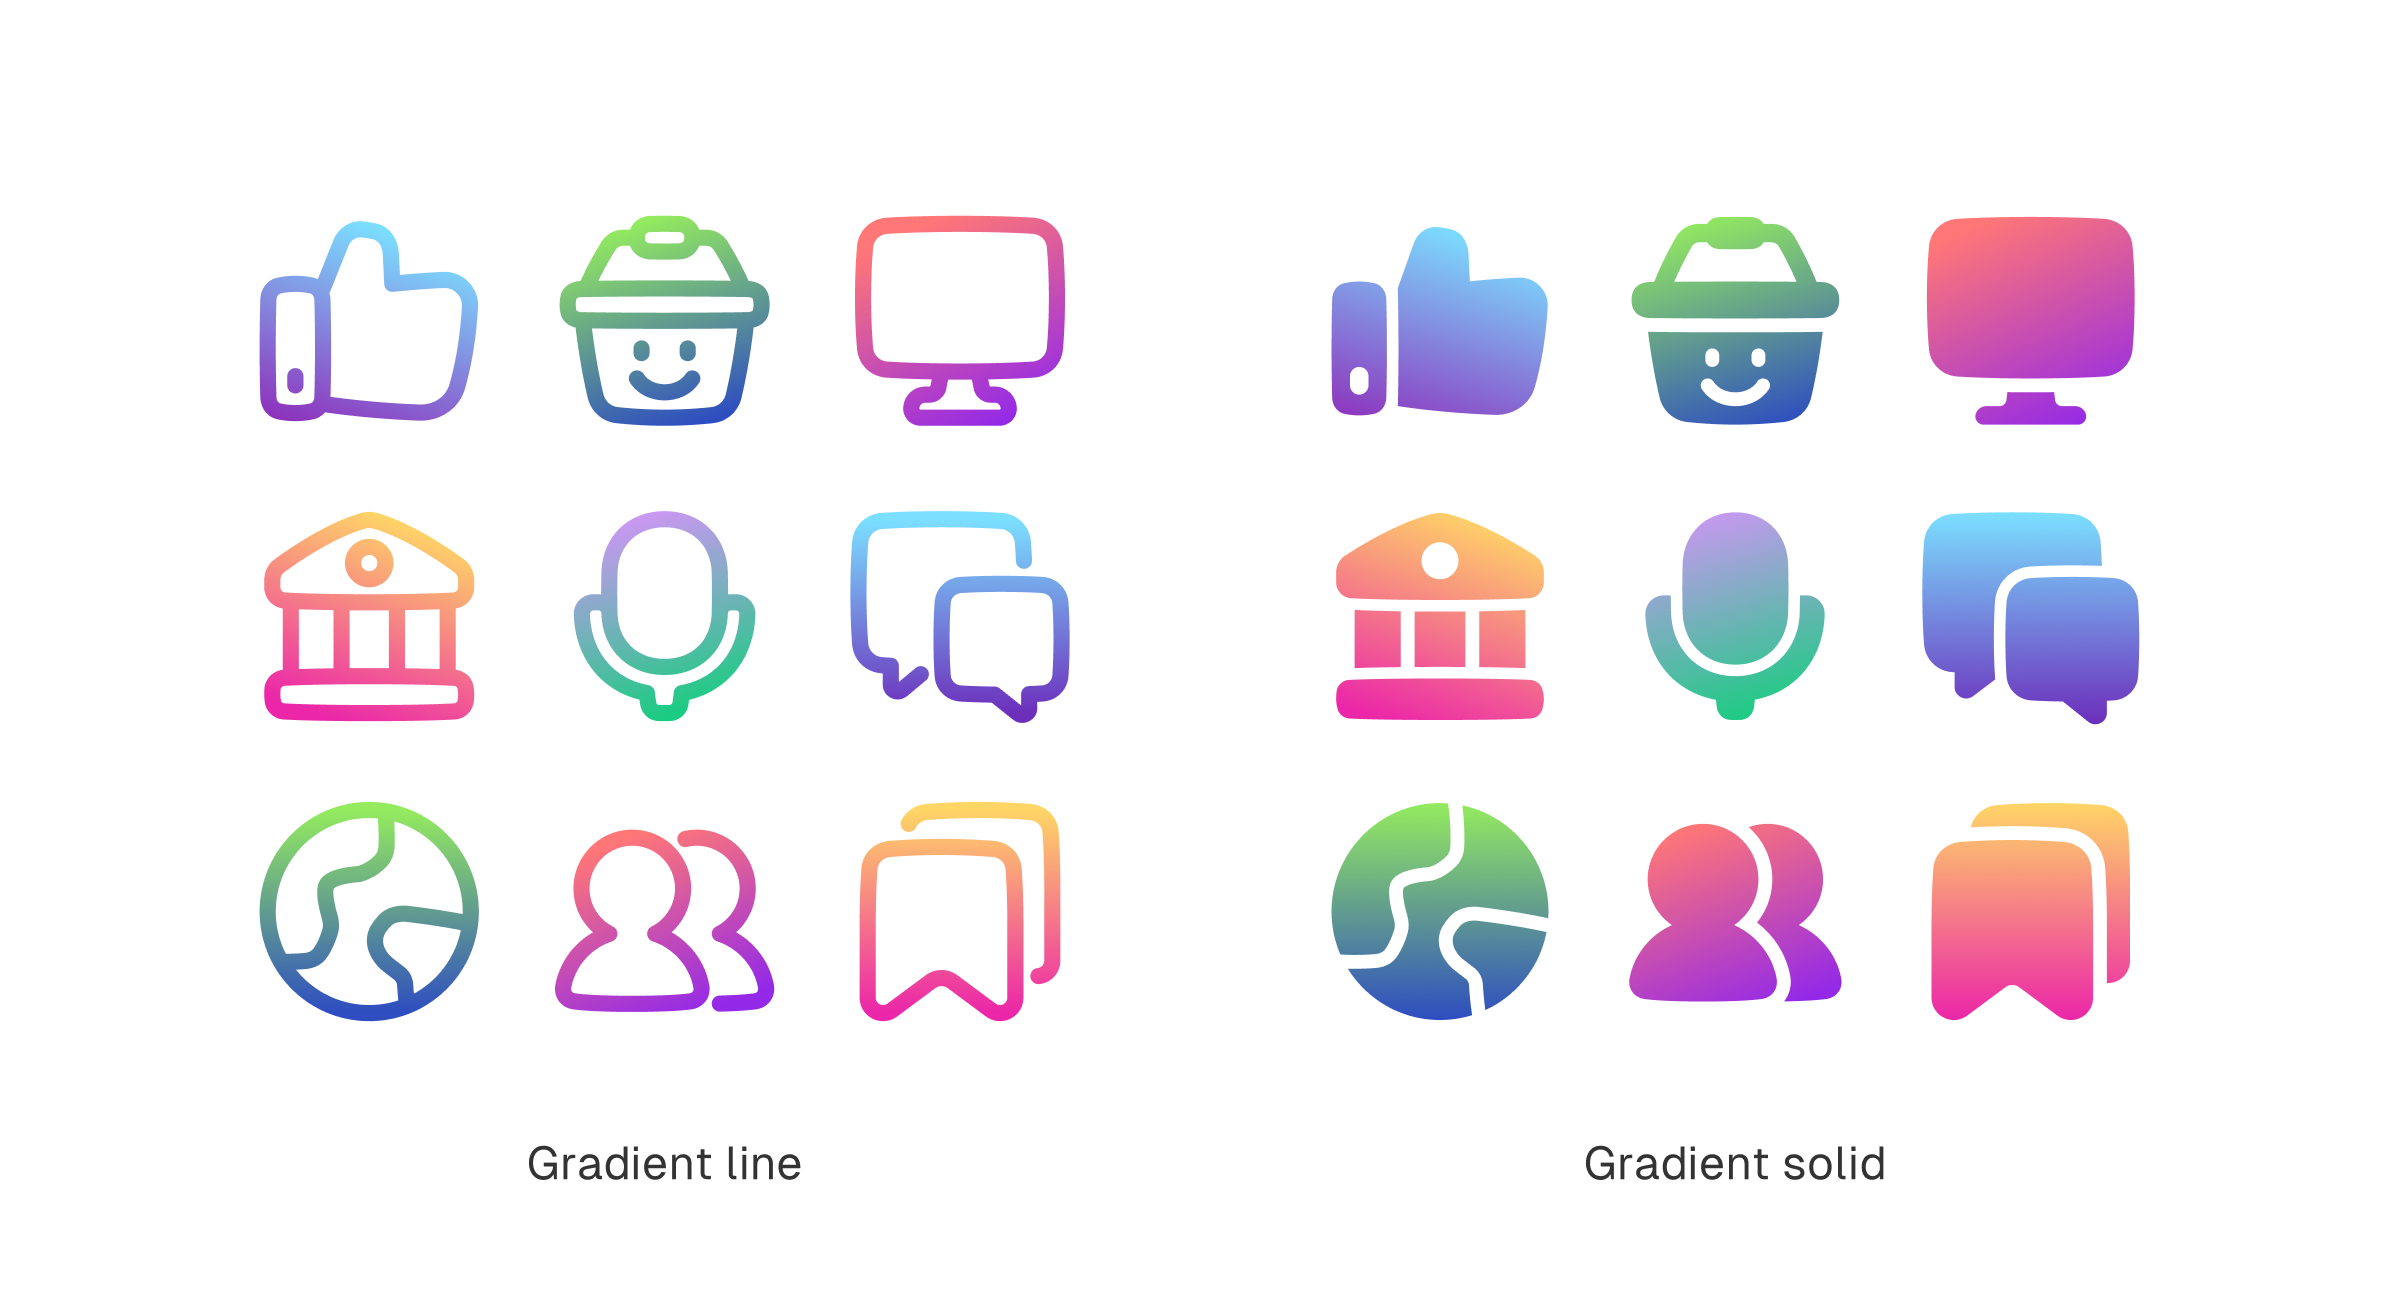 6 ways for coloring icons to stand out, and how to use them